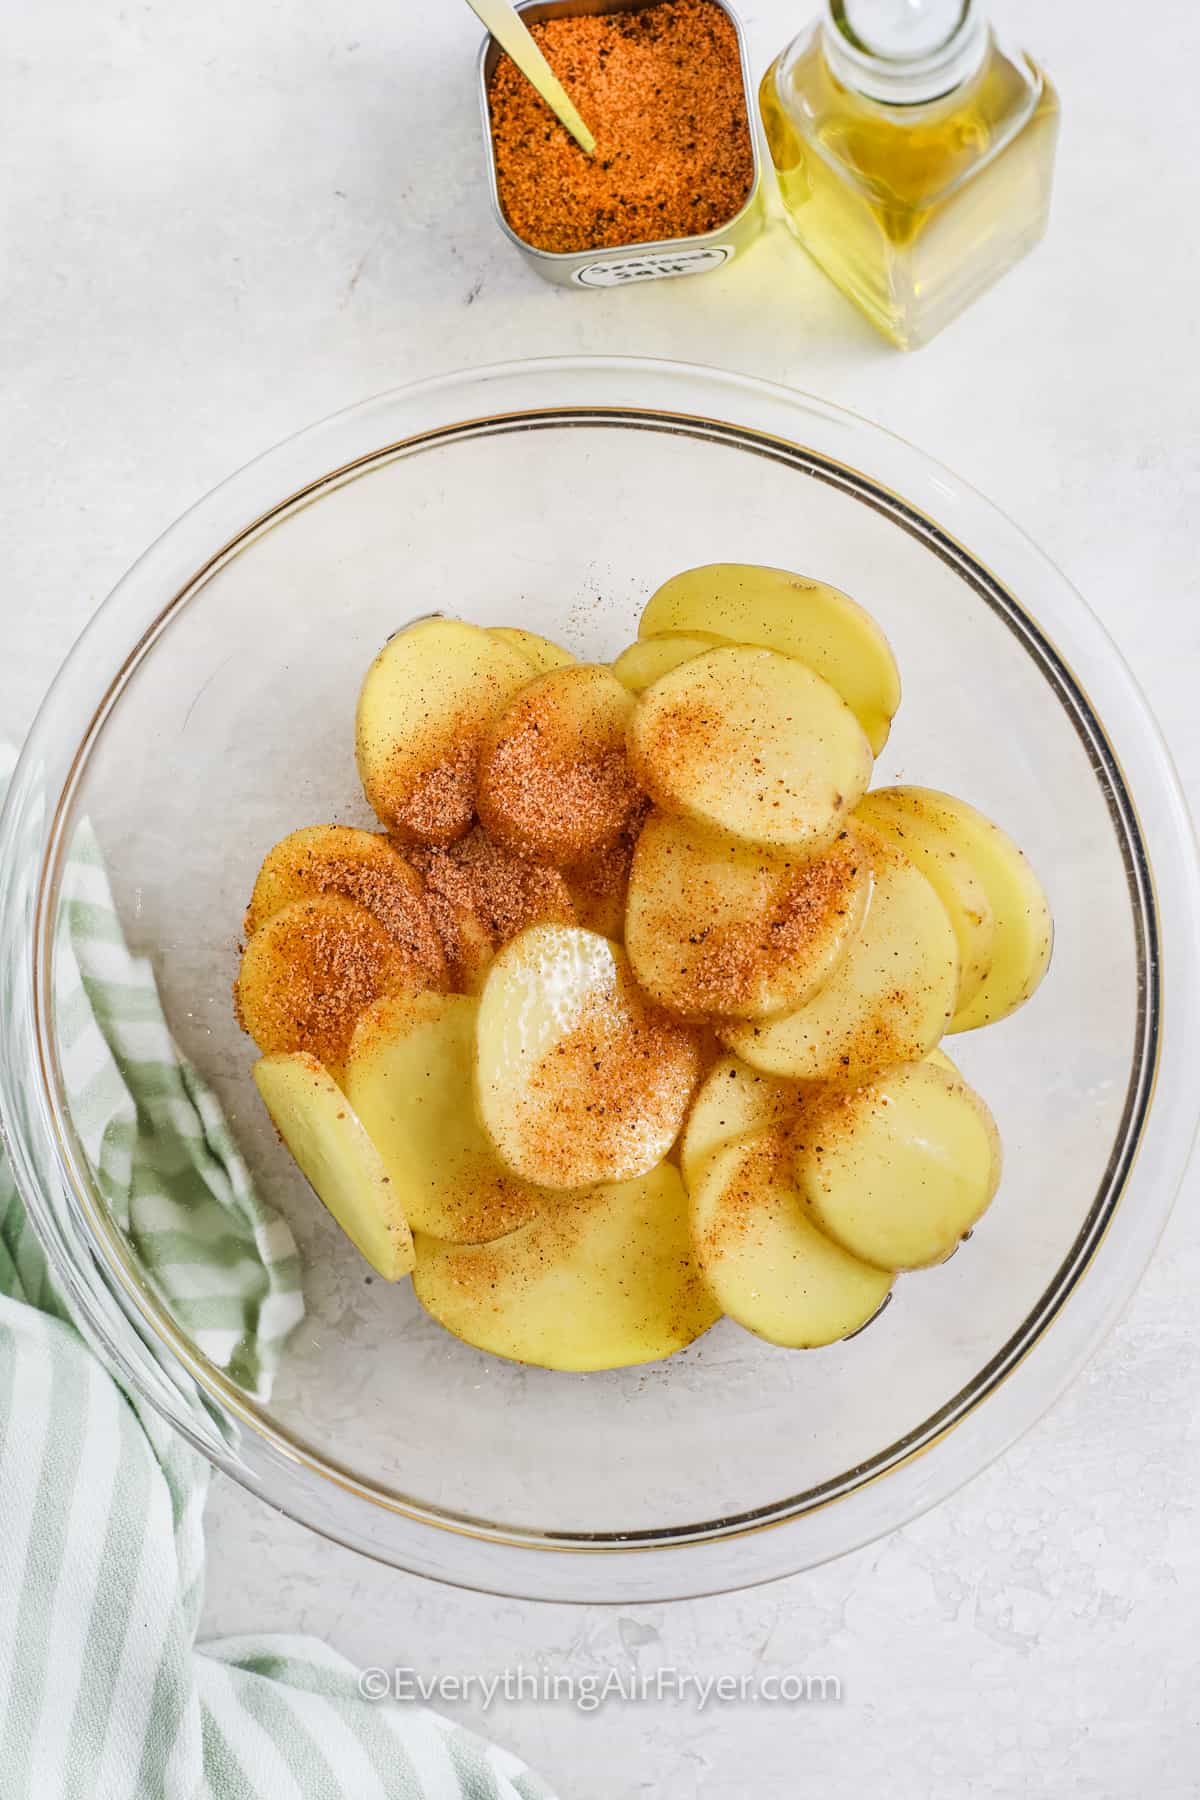 adding seasoning and oil to potato slices to make Sliced Potatoes in the Air Fryer